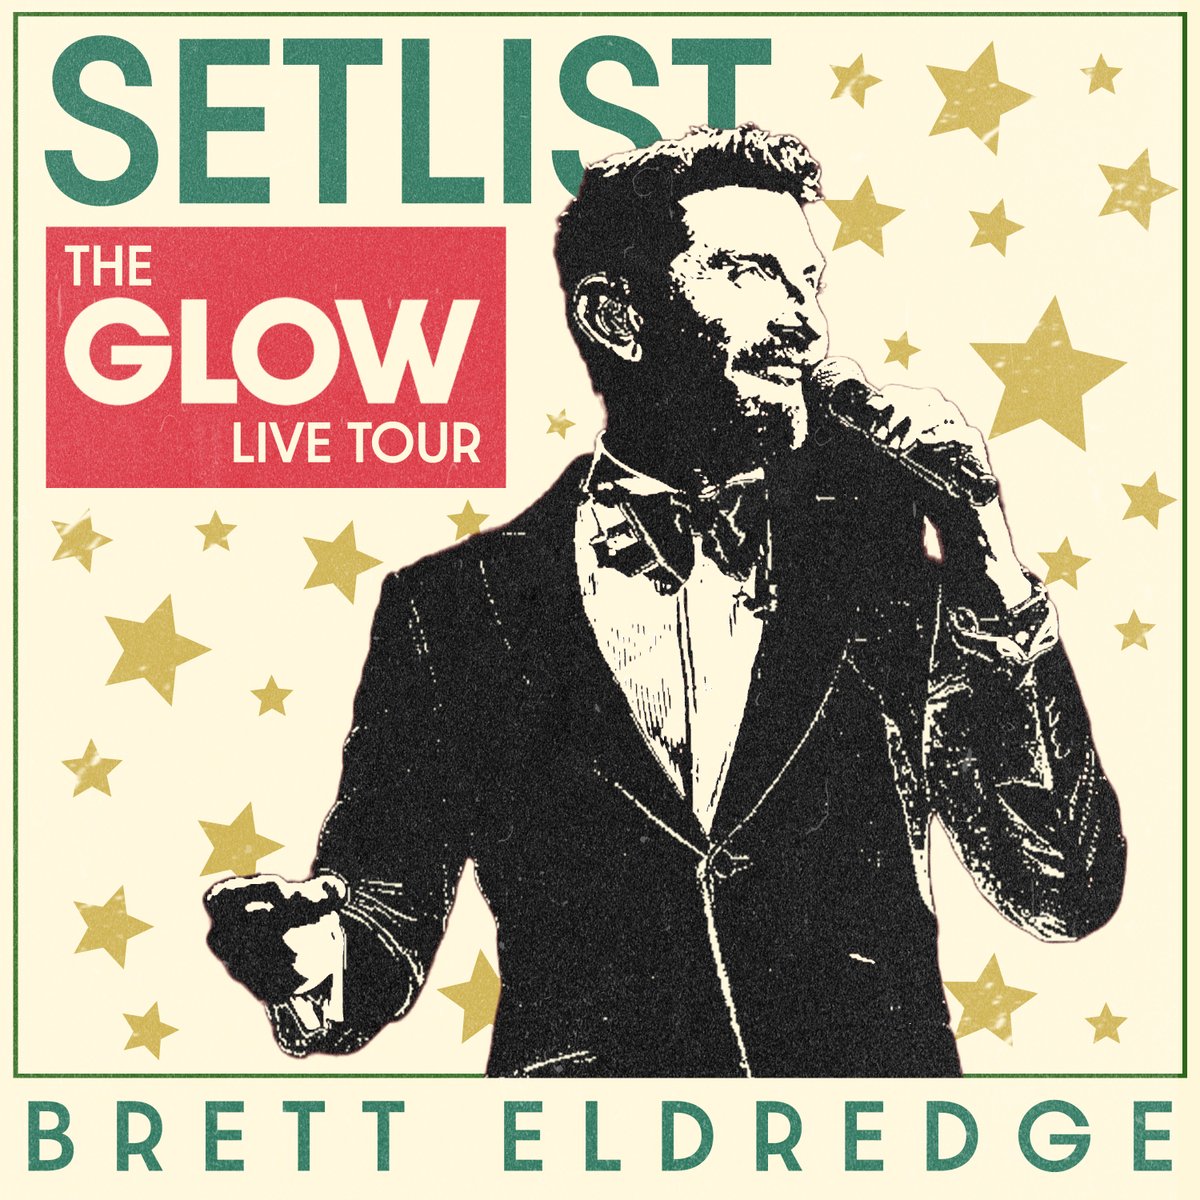 I've been having the best time on the #GLOW tour so far ❄️ Can't wait to see the rest of you soon... get ready for the show with the official GLOW setlist out everywhere now! bretteldredge.lnk.to/theglowlivetour